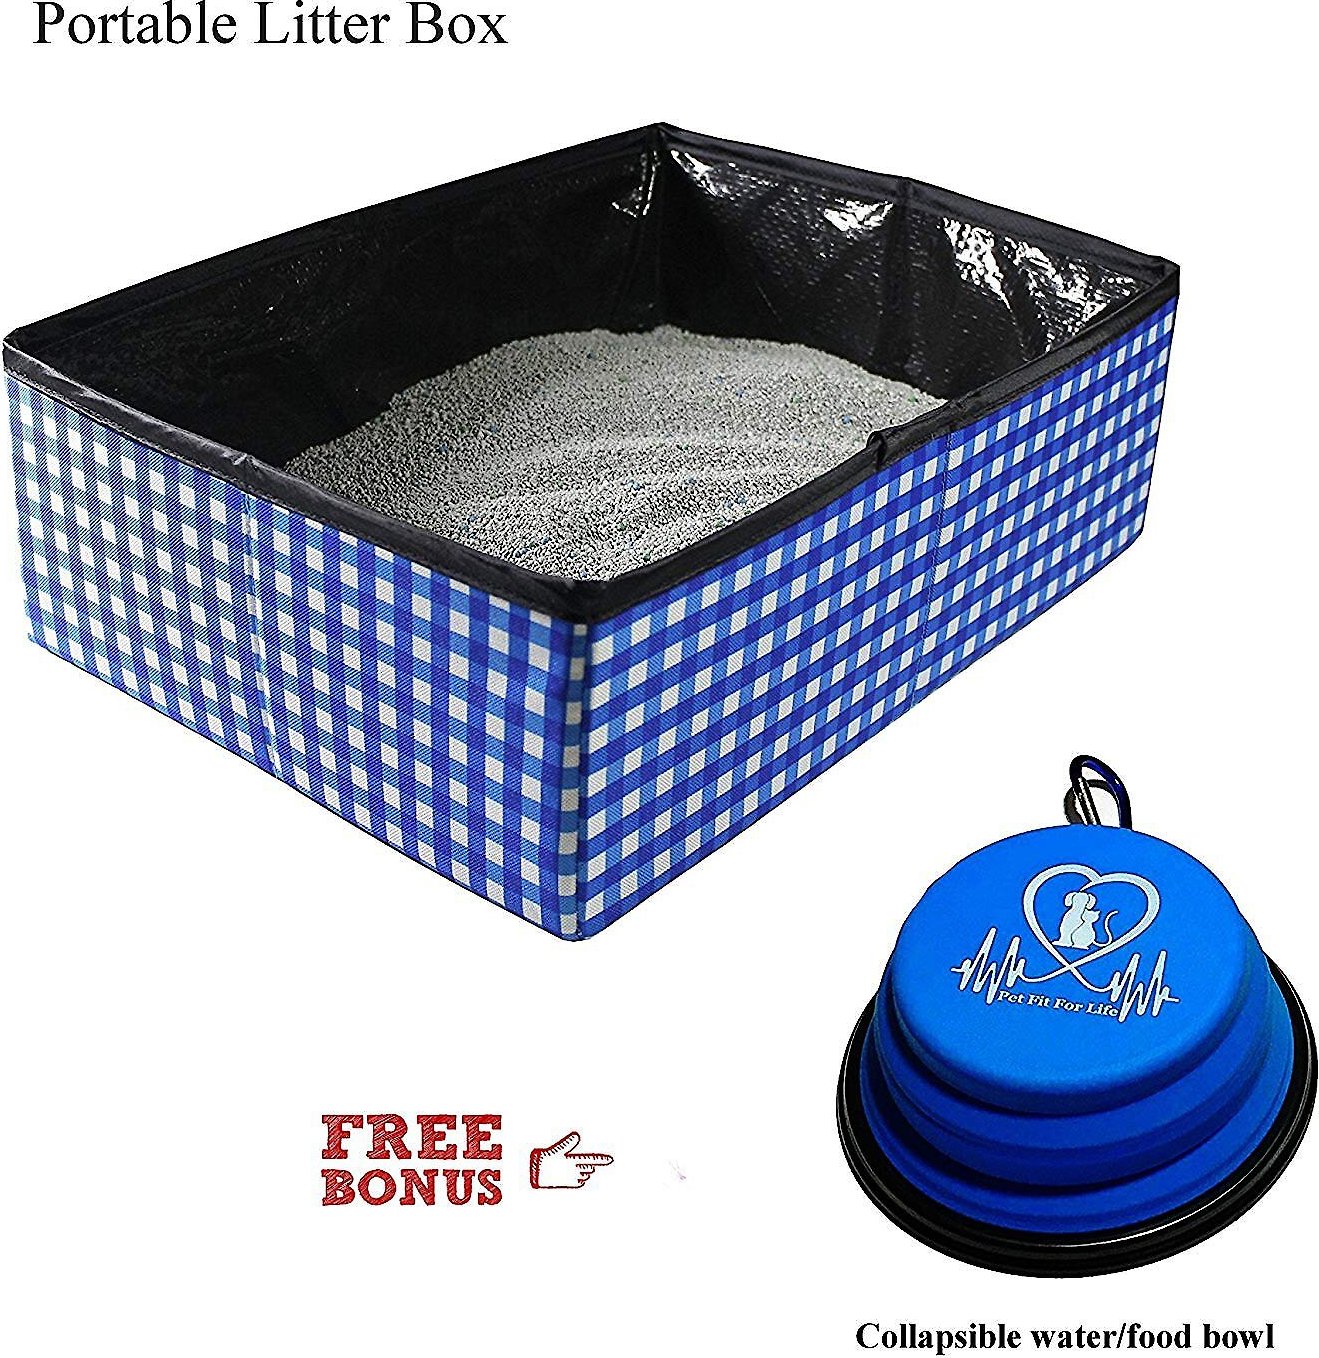 Pet Fit For Life Collapsible Portable Litter Box